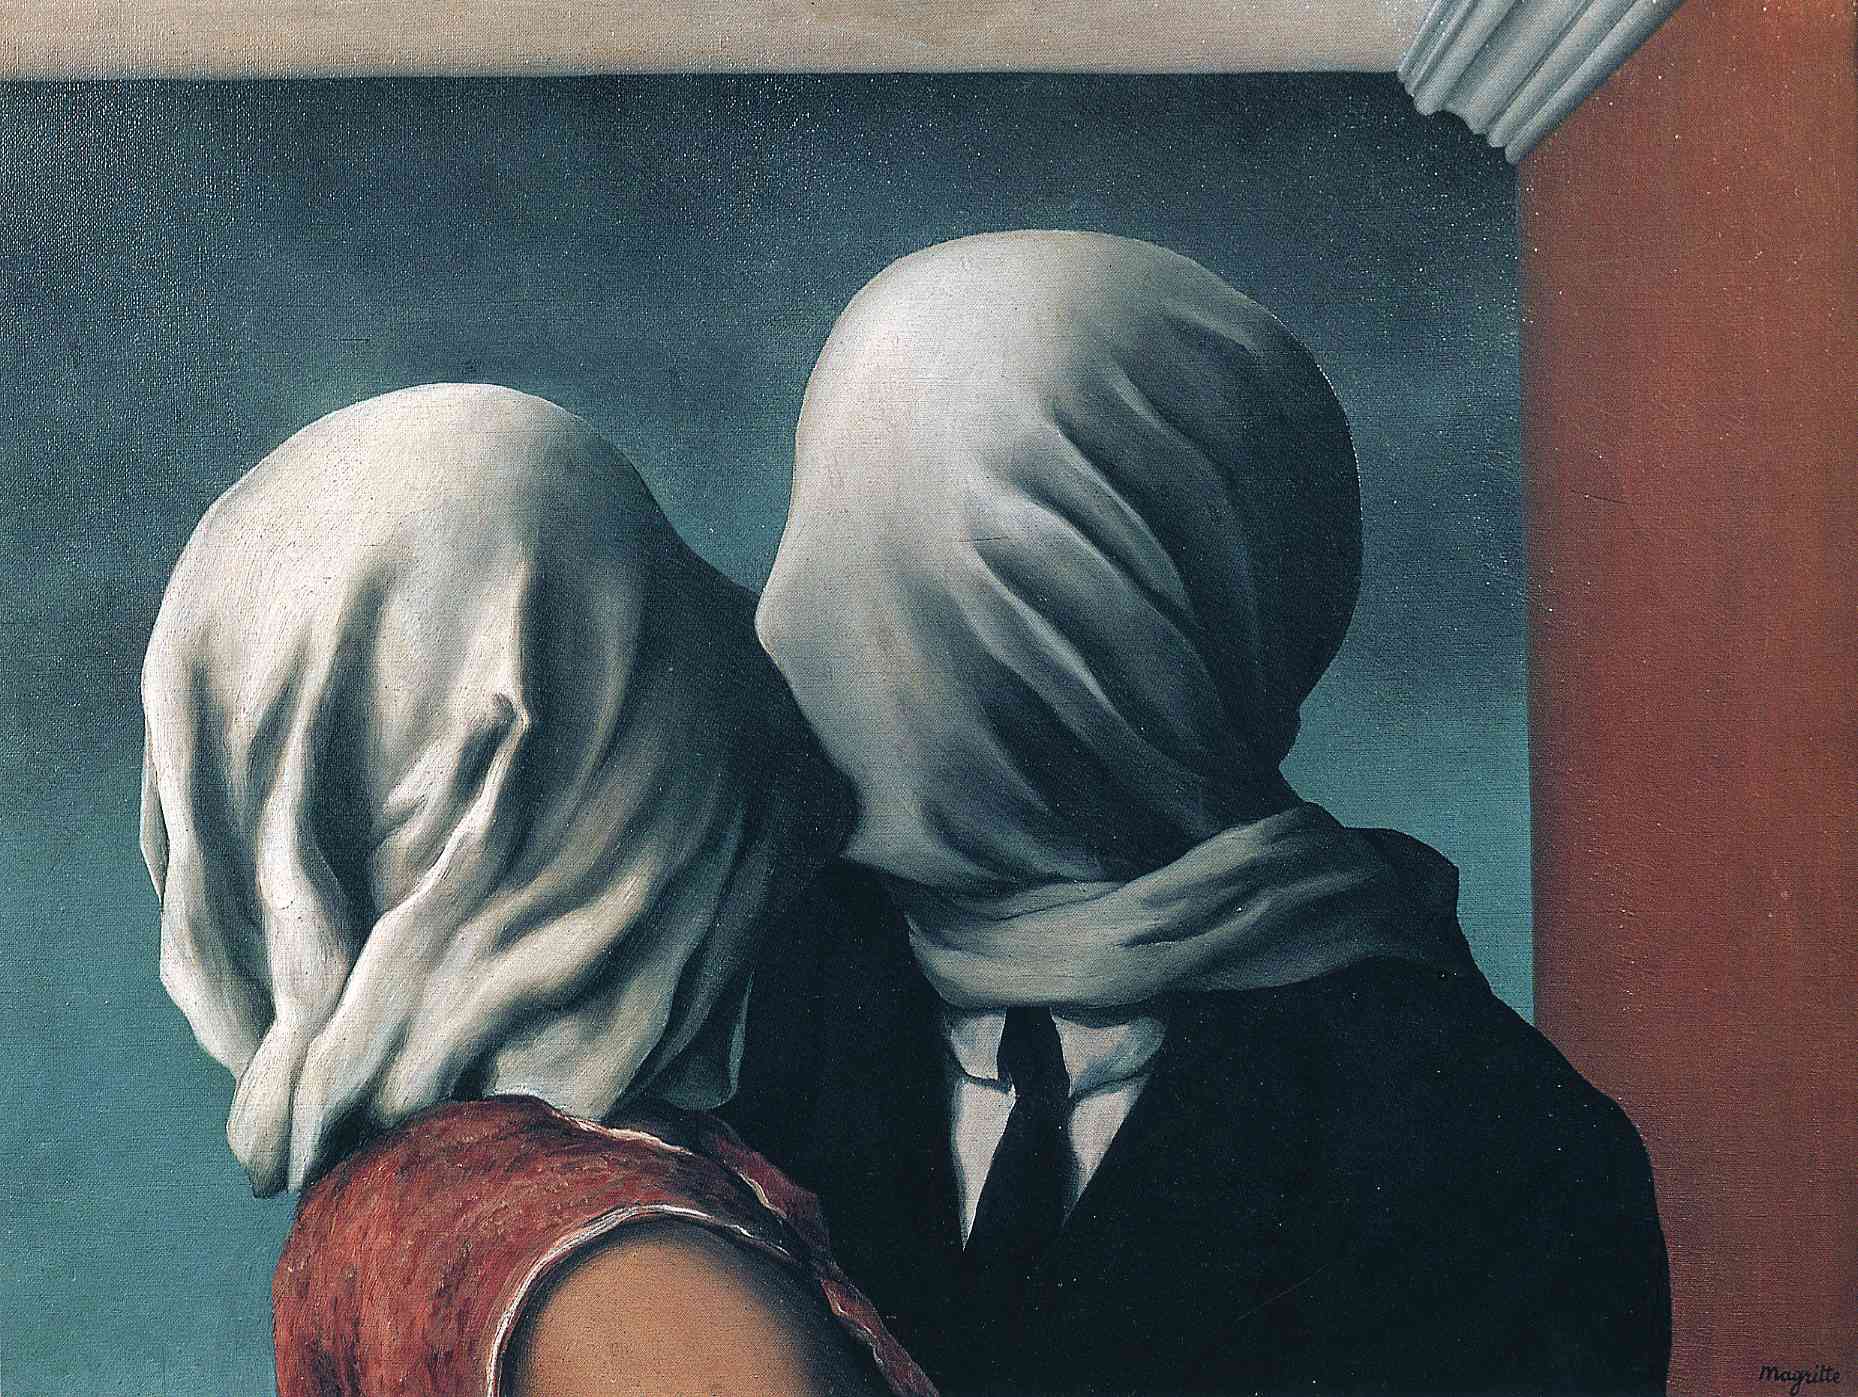 The Lovers by René Magritte - 1928 -  54 x 73.4 cm Museum of Modern Art